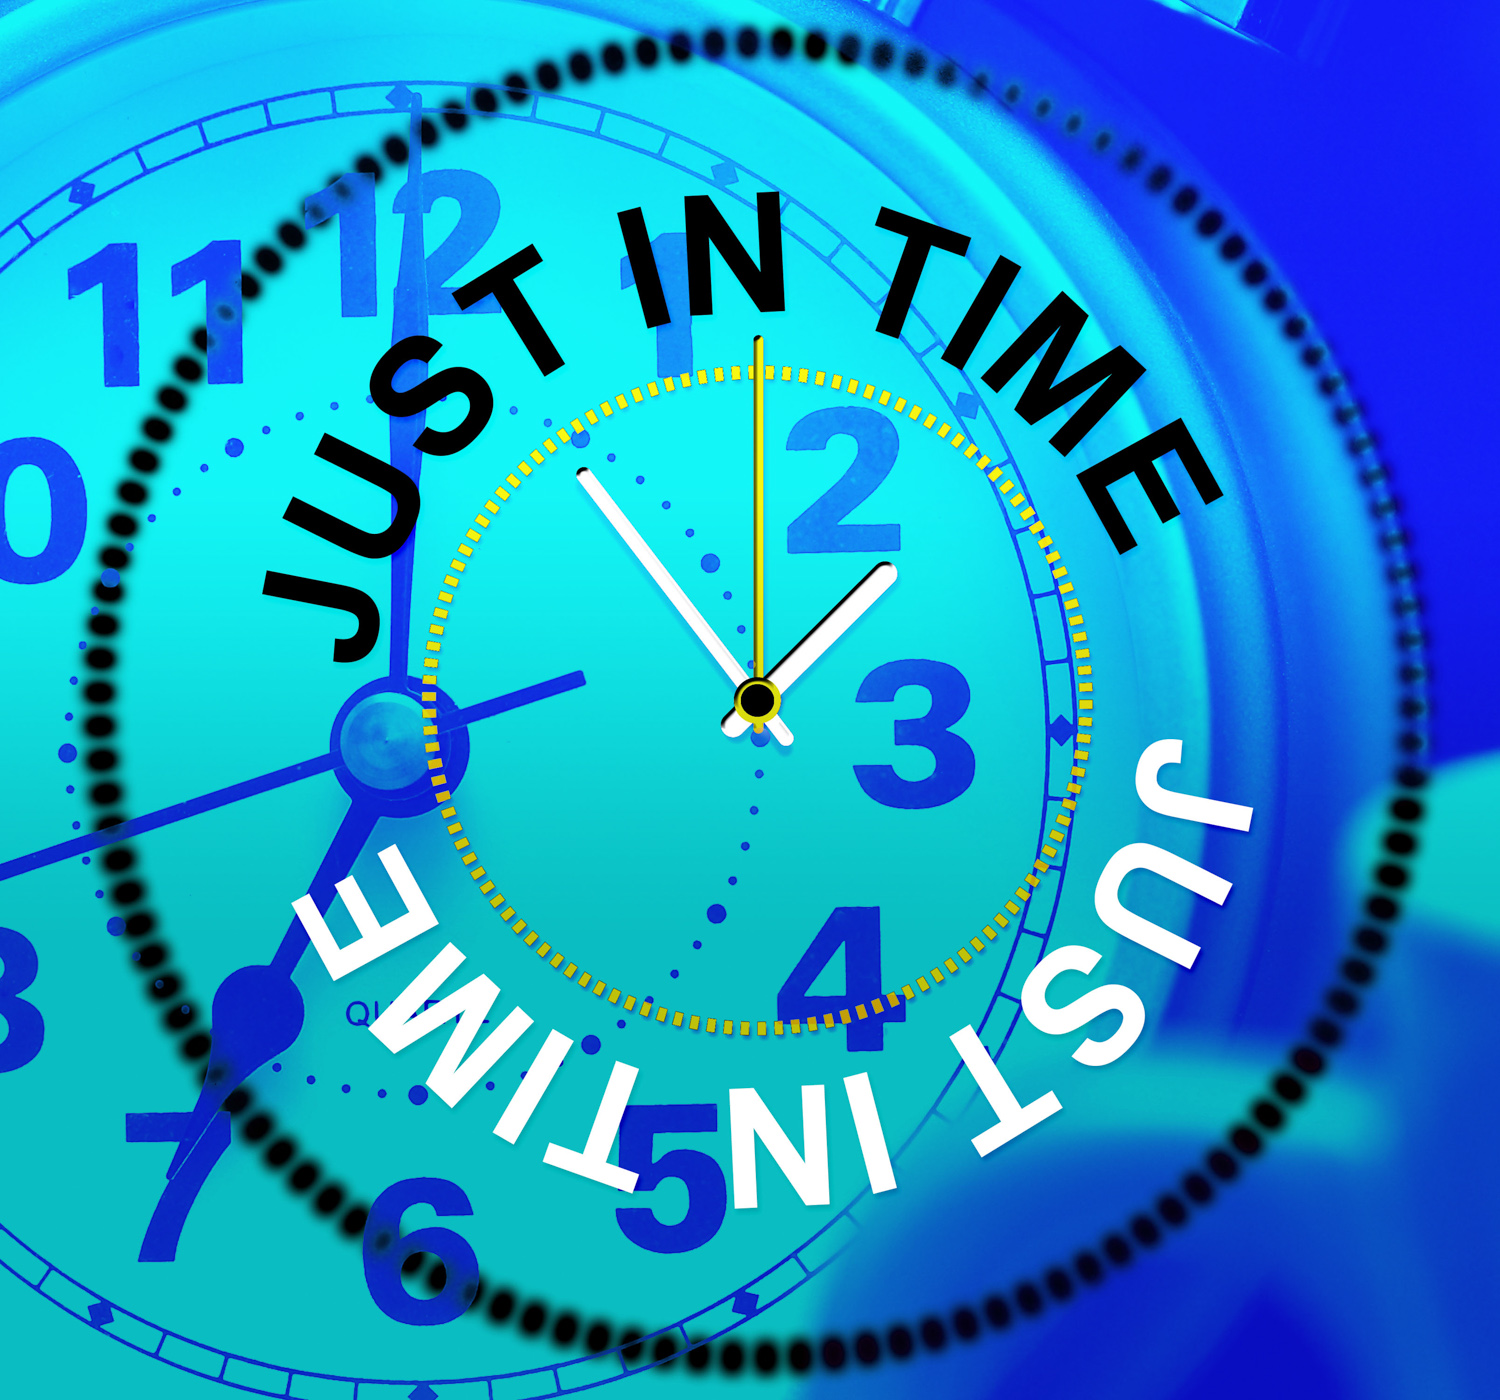 Just in time indicates being late and eventually photo